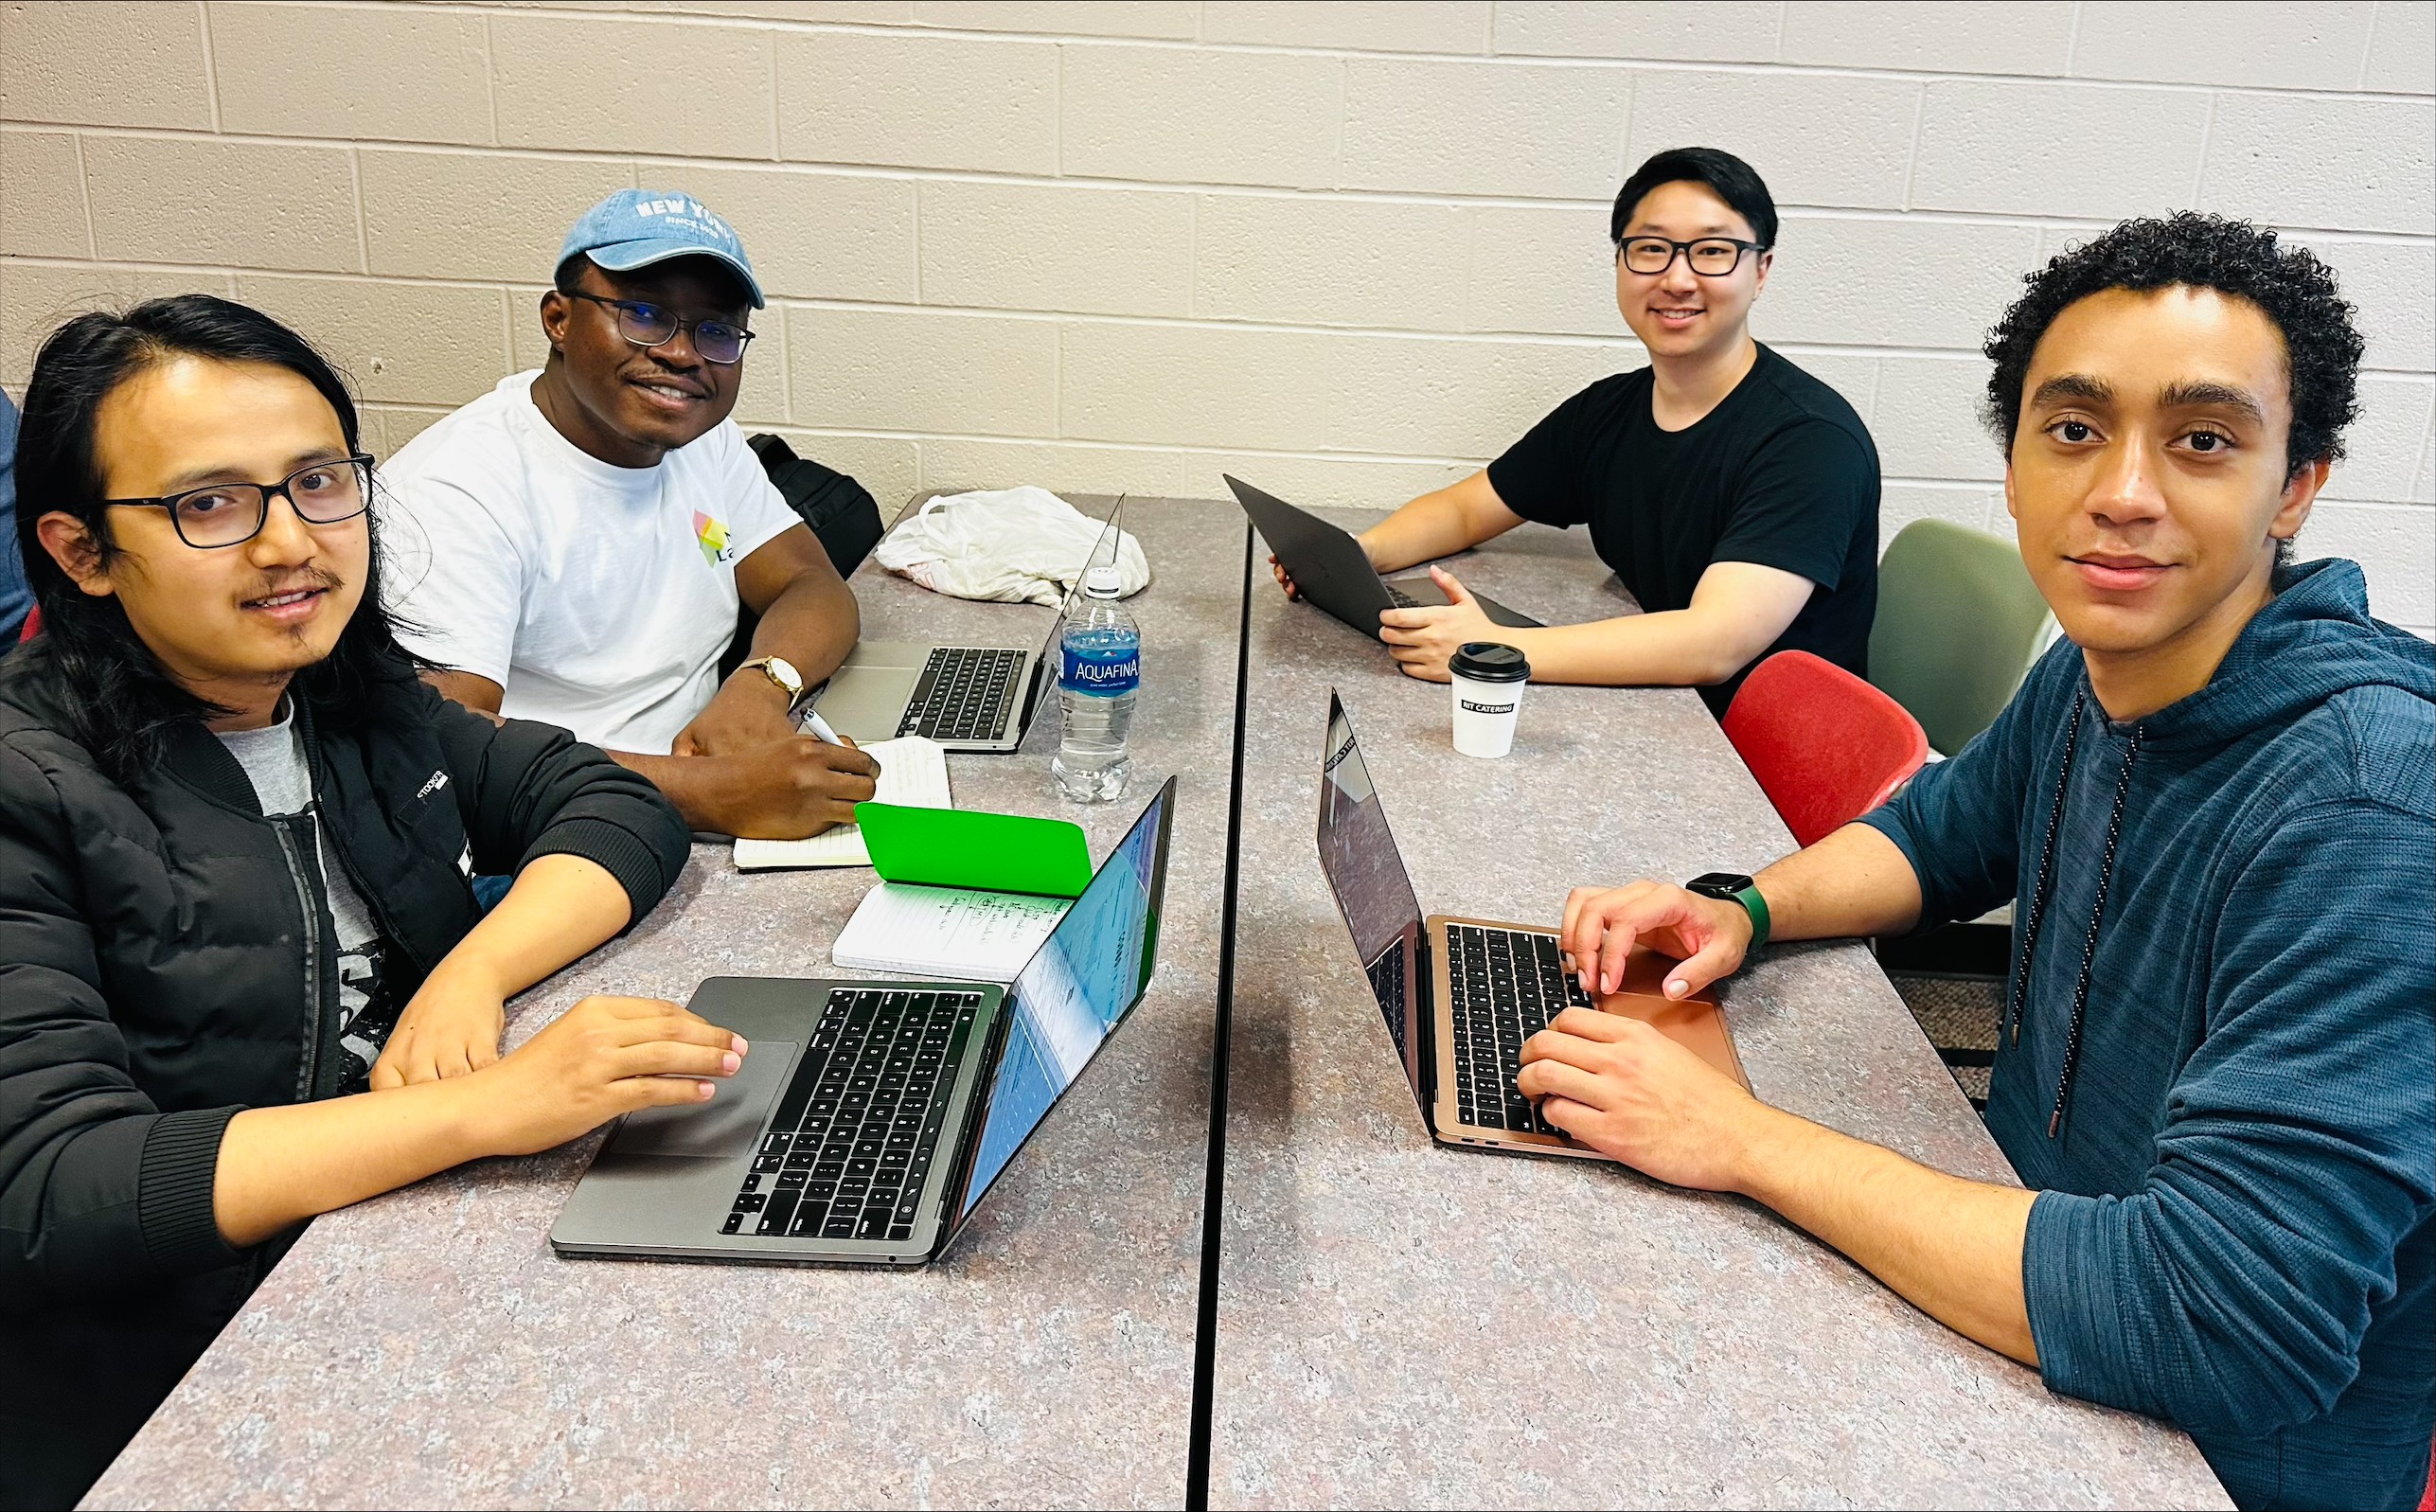 Four students sit around a table with laptops open in front of them, they face the camera and smile.